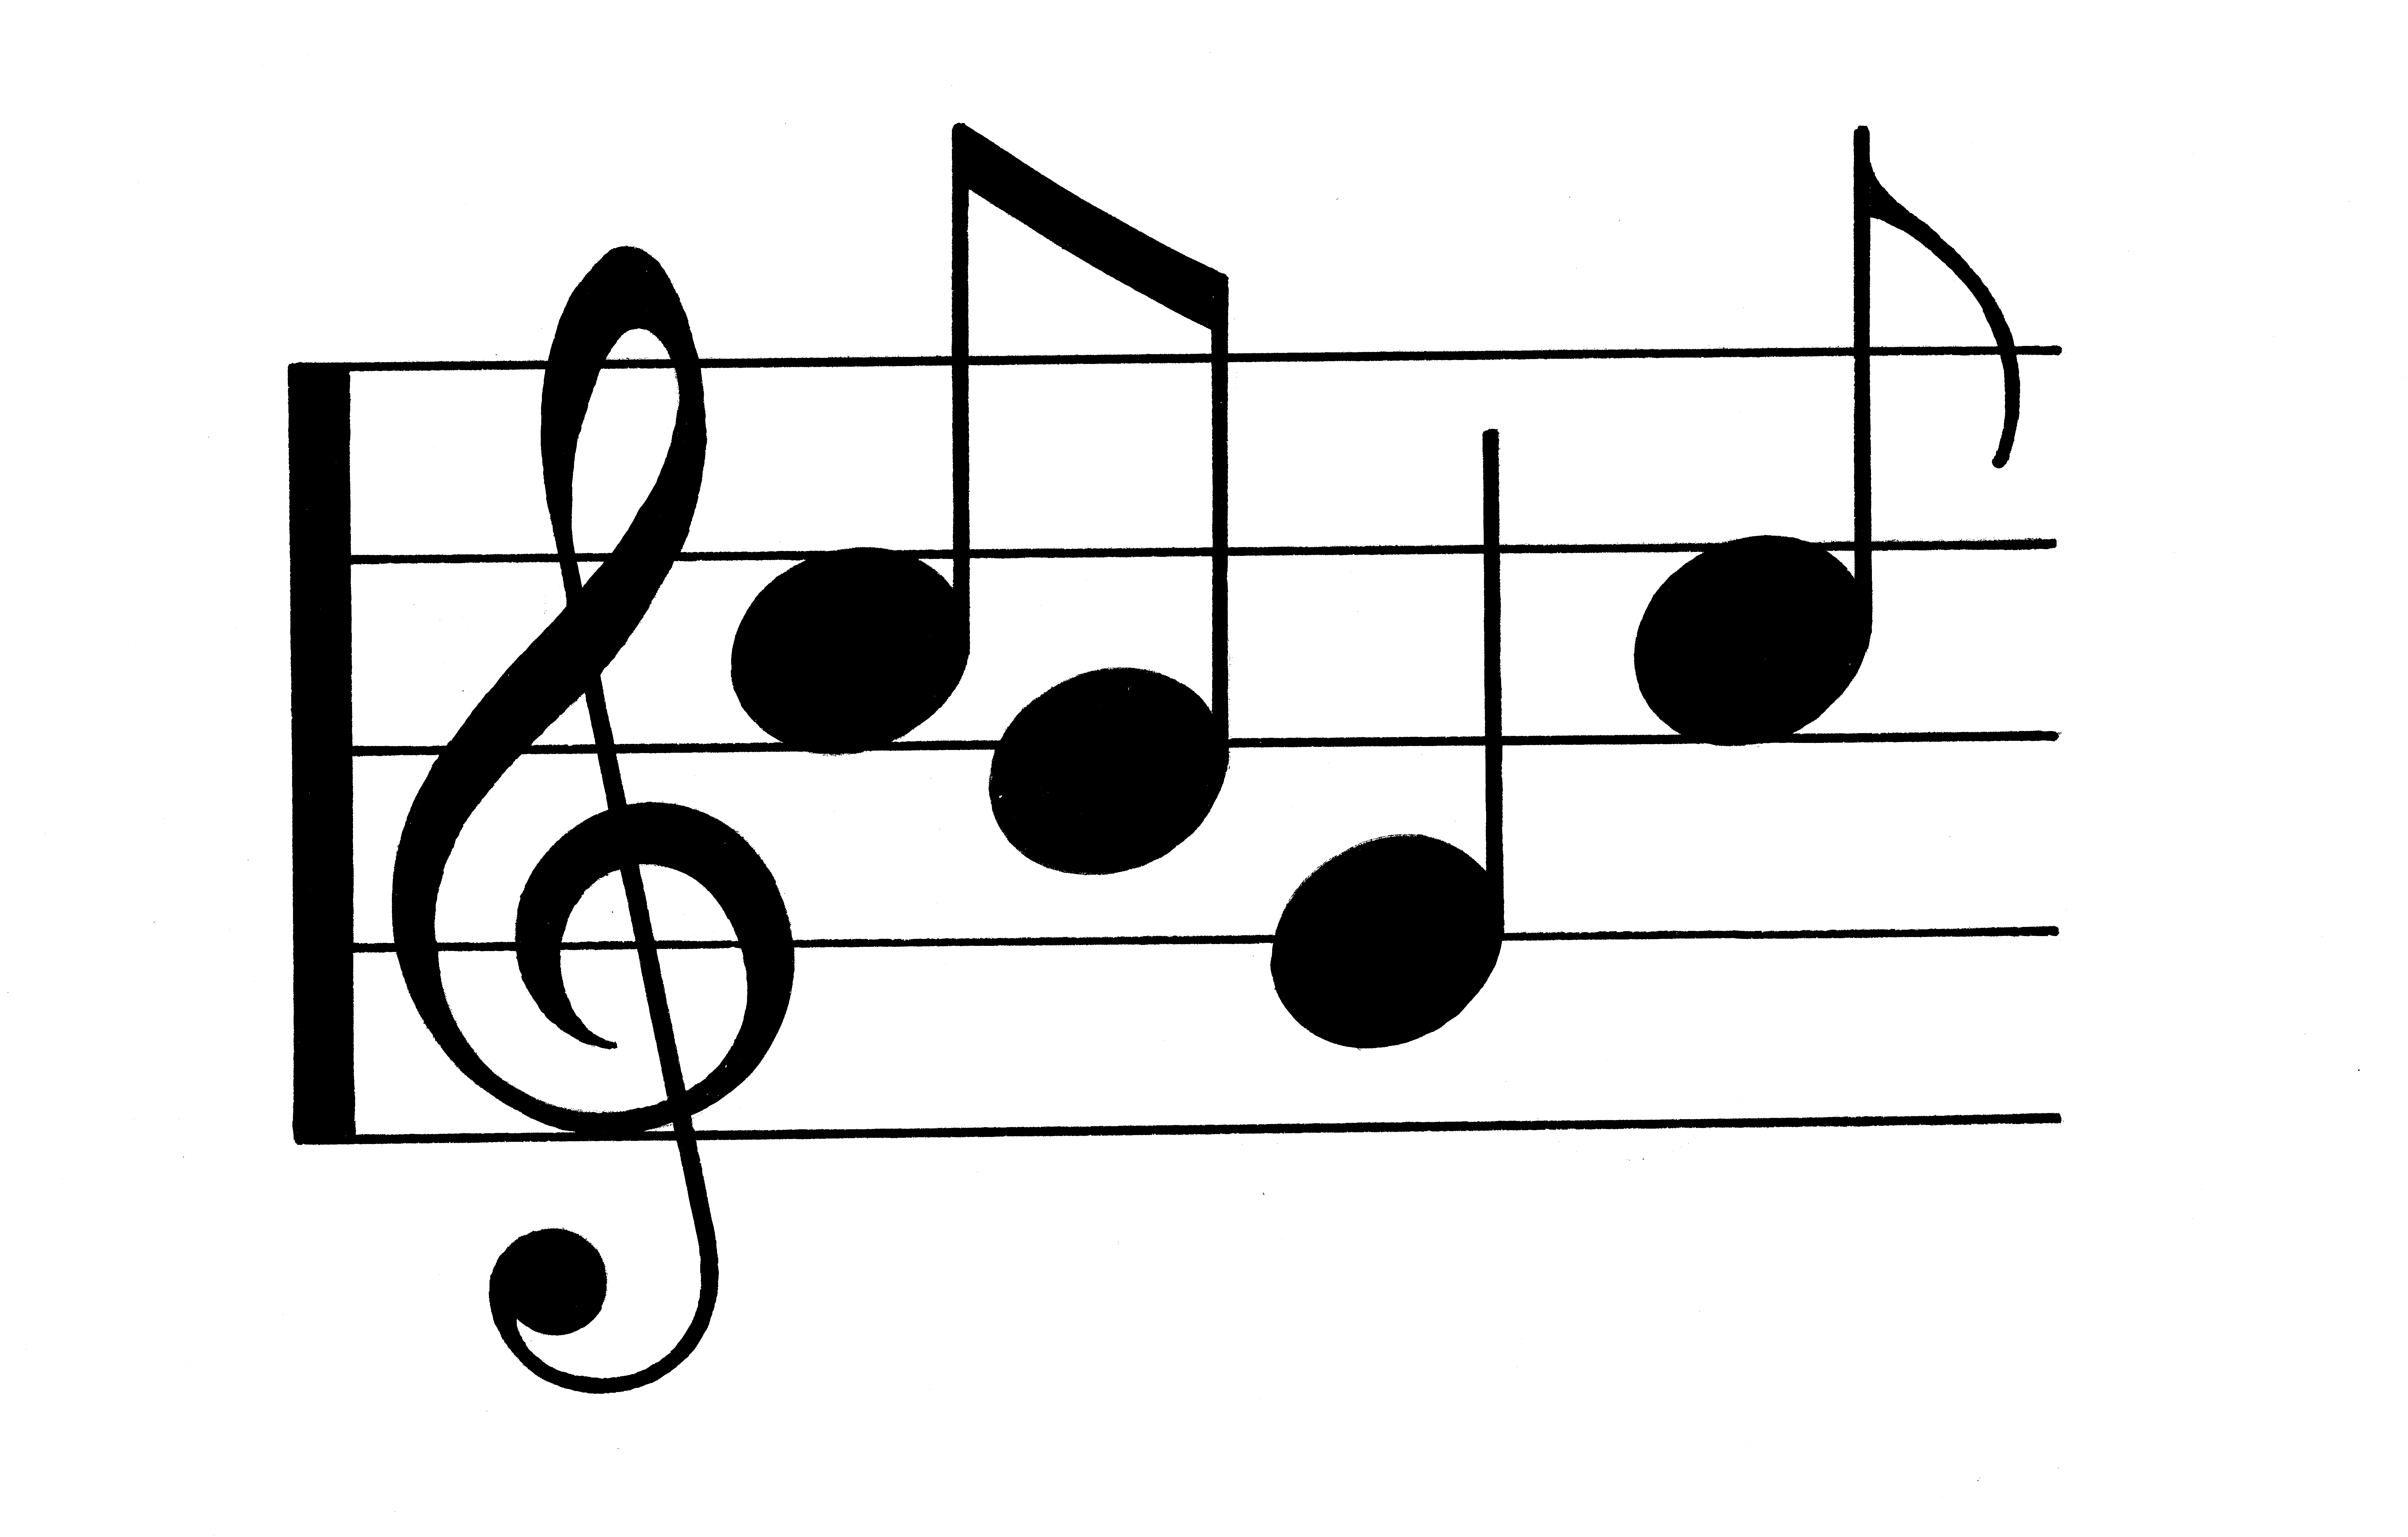 A black-and-white illustration of four musical notes in the treble clef.